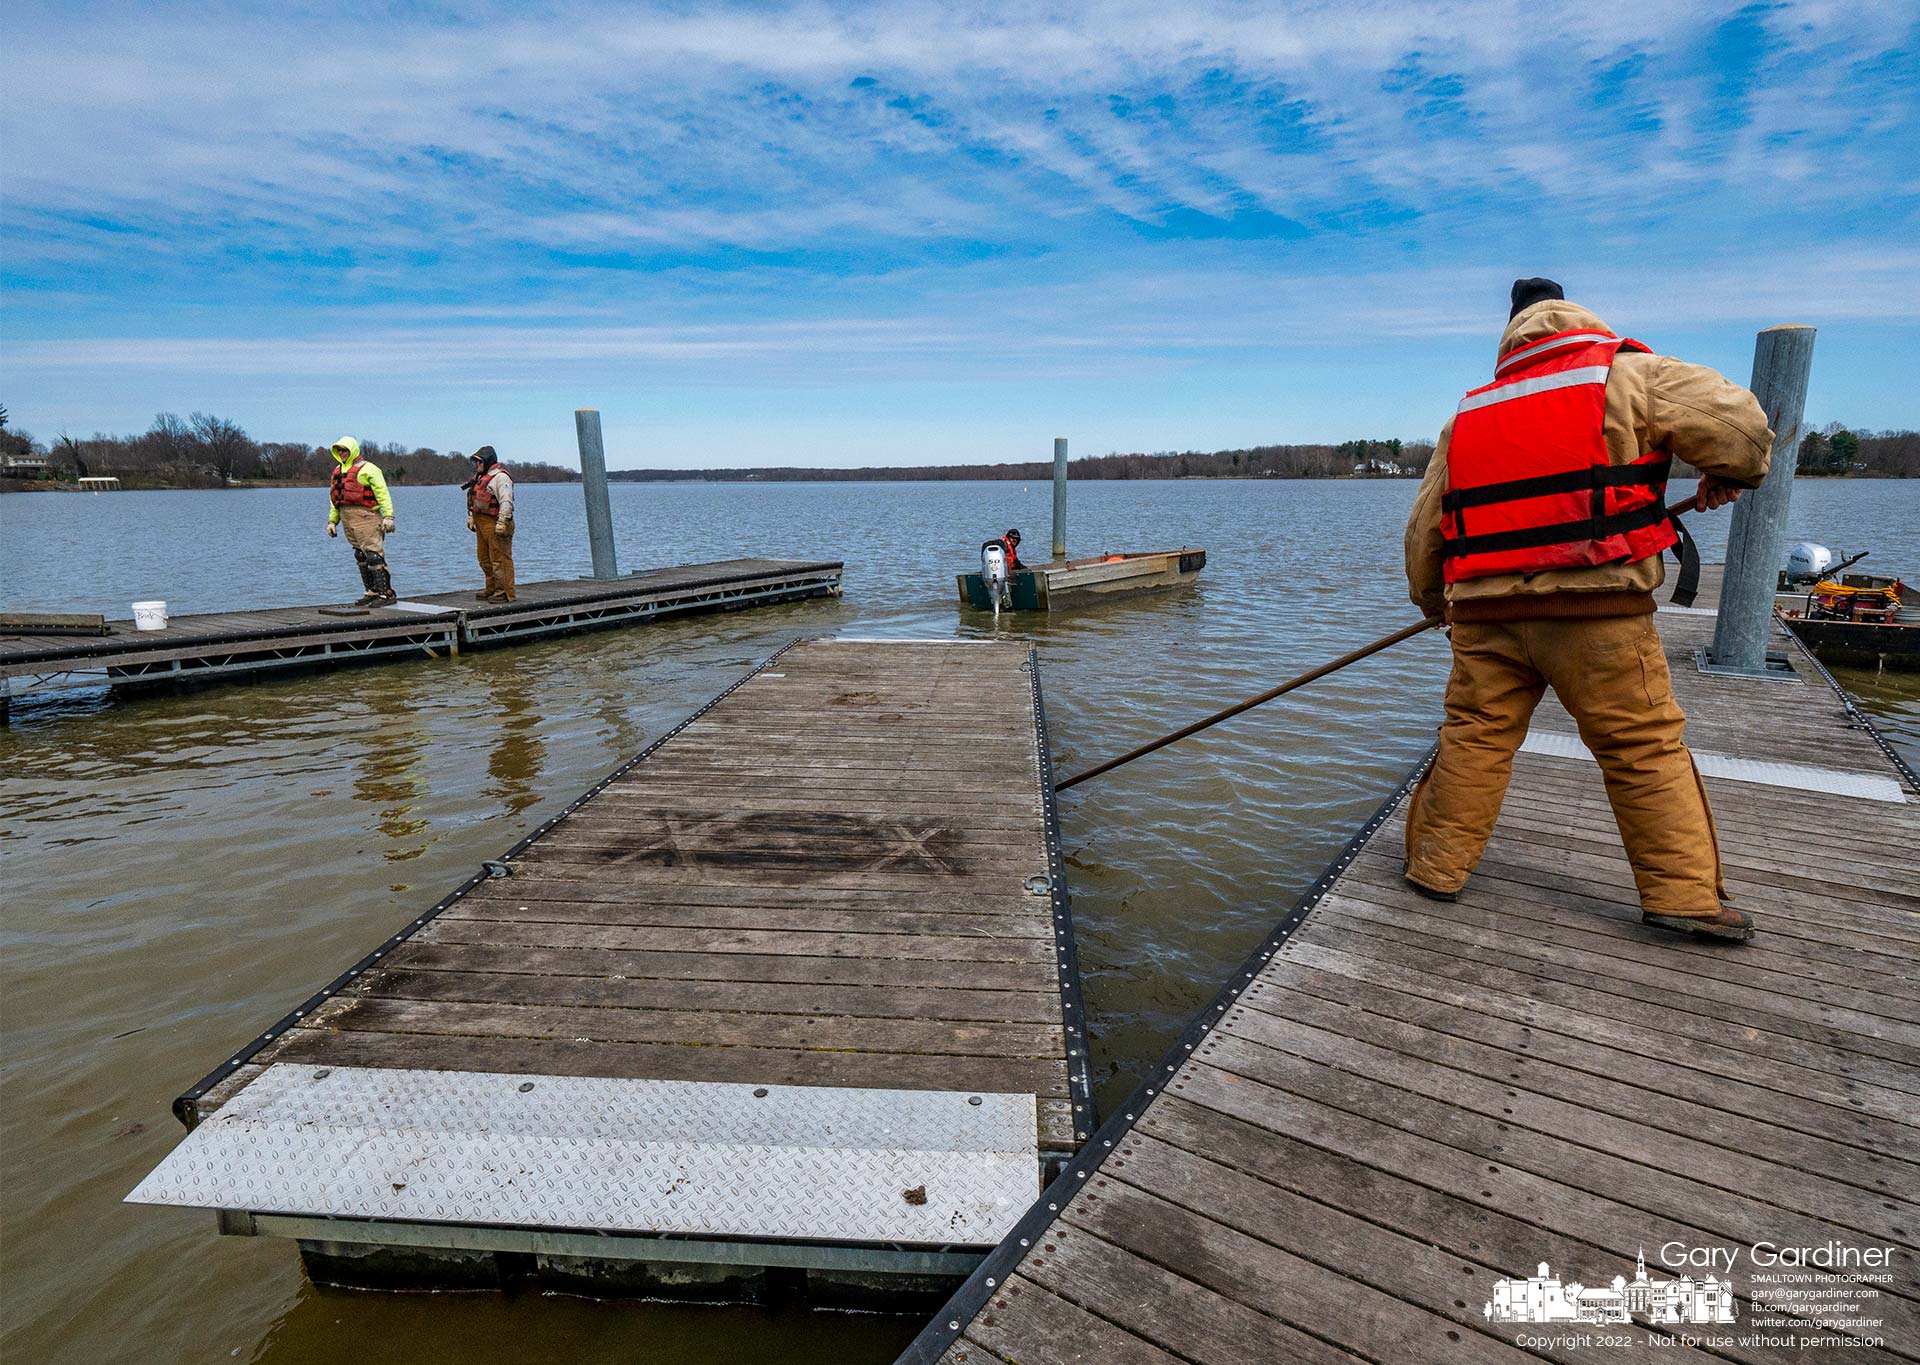 Workers install docks at the boat ramp at Red Bank on Hoover Reservoir beginning the task of installing docks on all the ramps on Hoover as warmer weather begins the spring and summer season. My Final Photo for March 29, 2022.